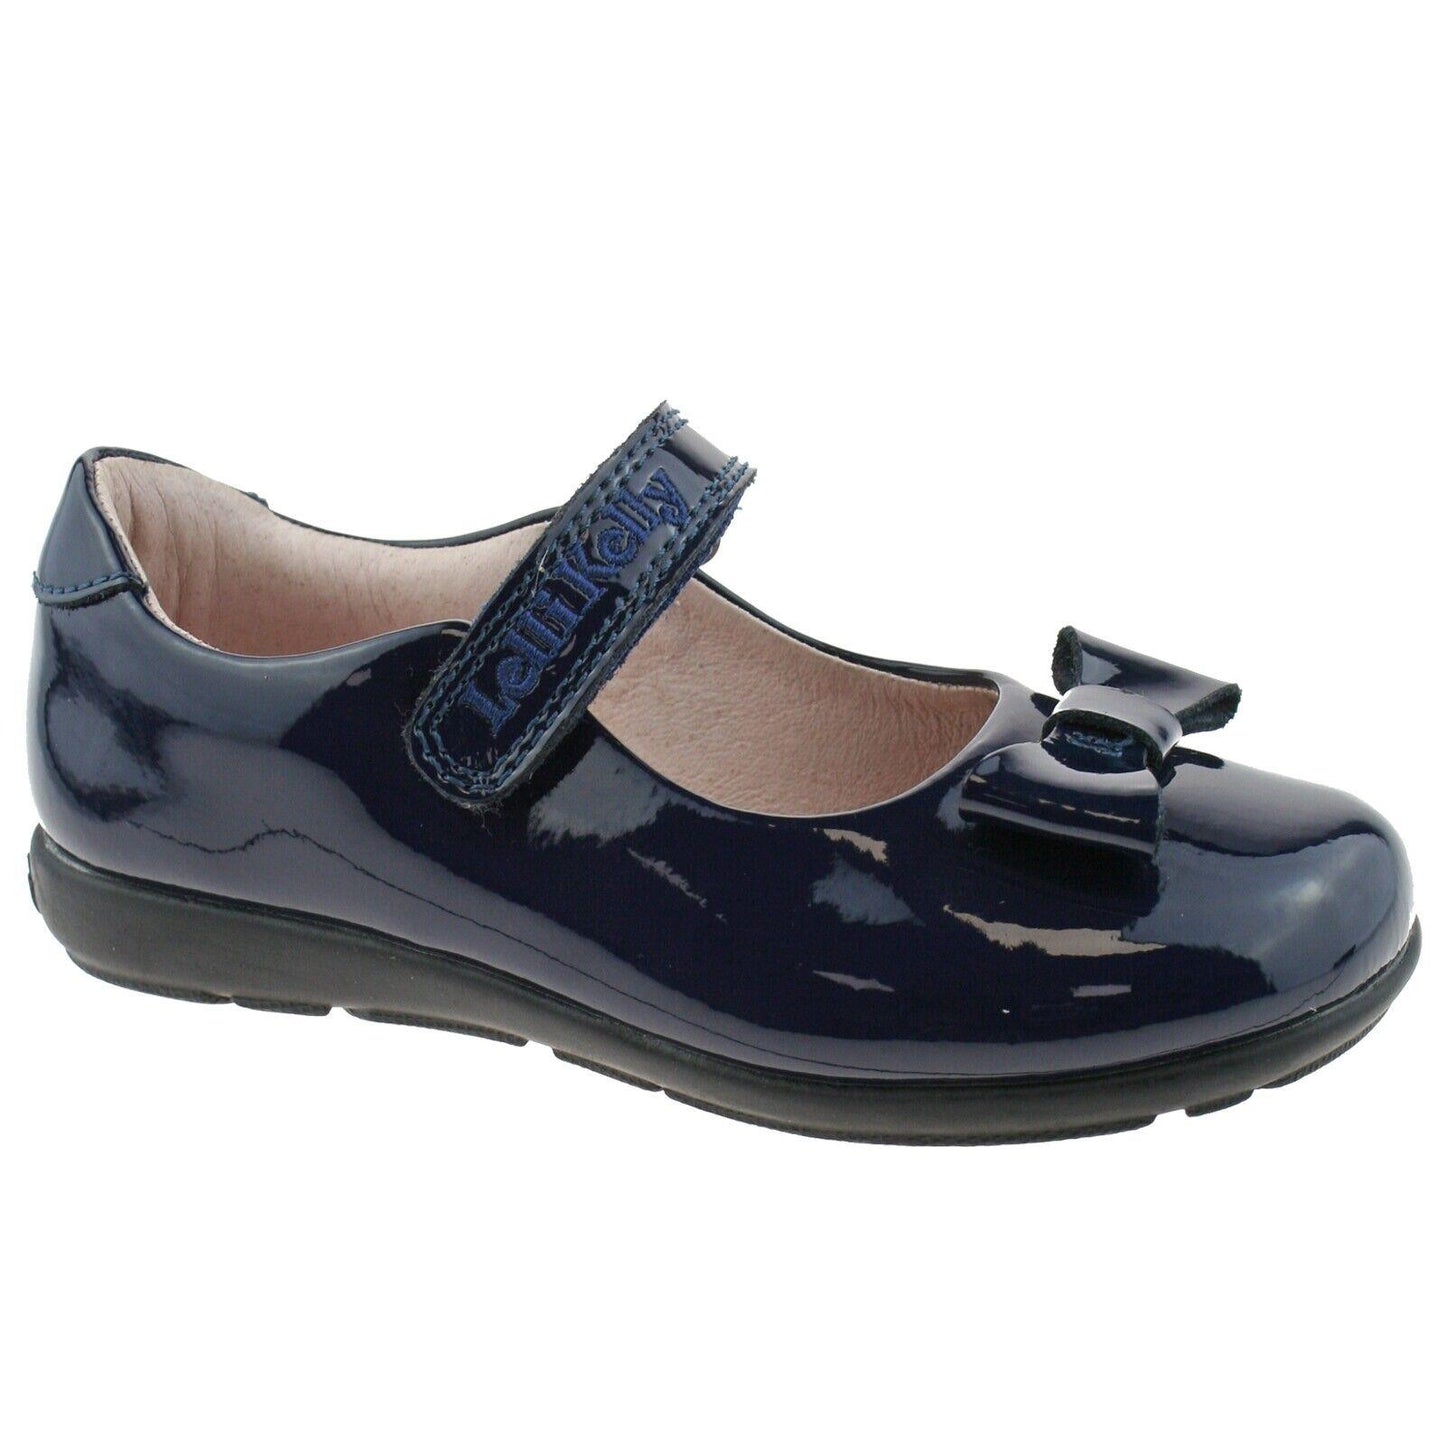 Lelli Kelly LK8246 (DE01) Perrie Navy Patent Leather School Shoes G Fitting